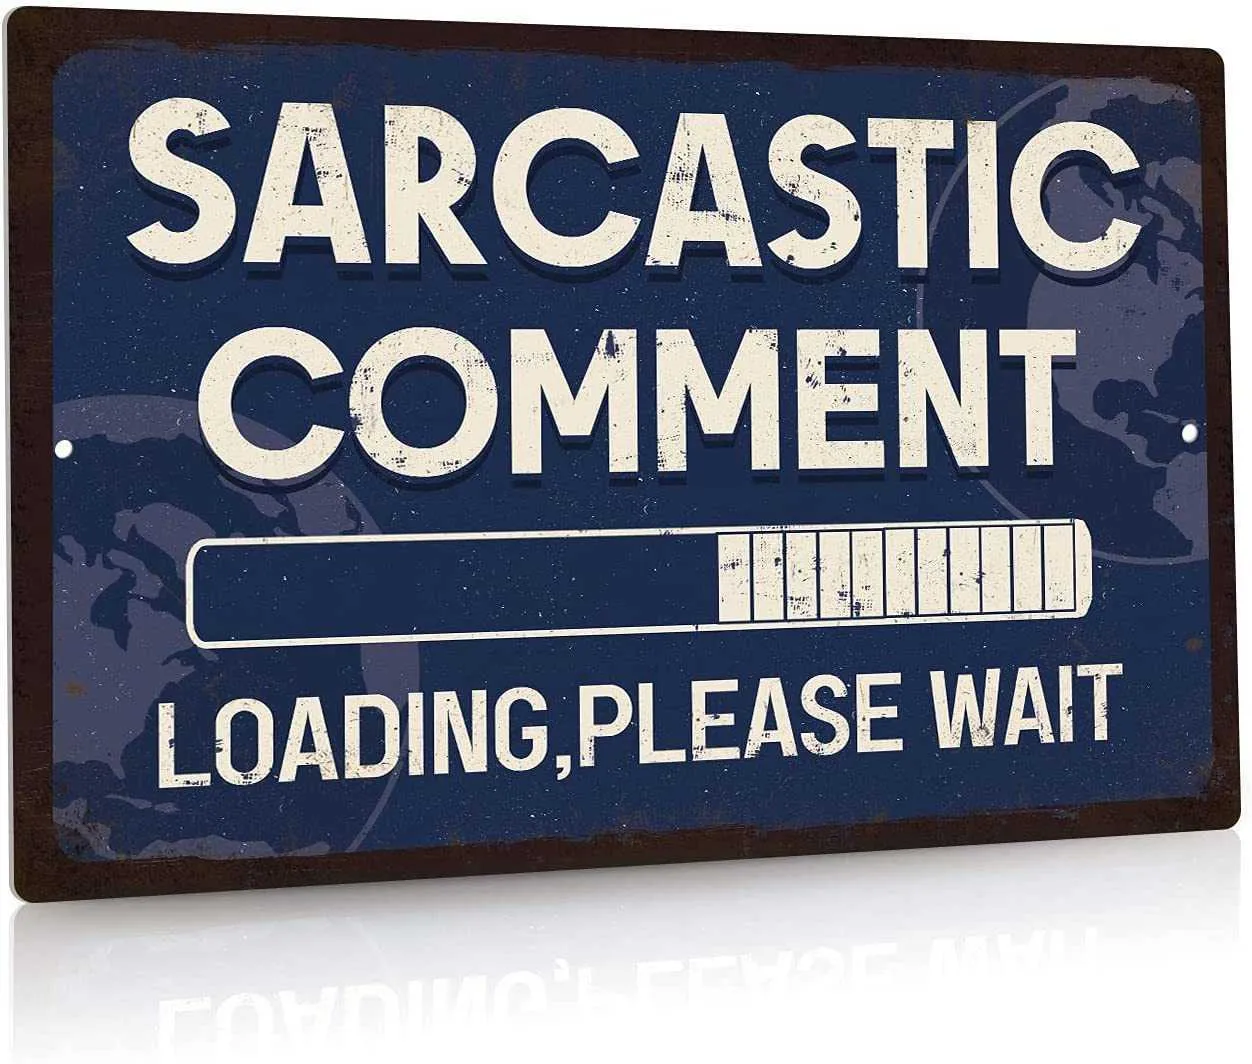 Funny Sarcastic Comment Metal Sign Man Cave Bar Decor Loading Please Wait 12x8 Inches7404890